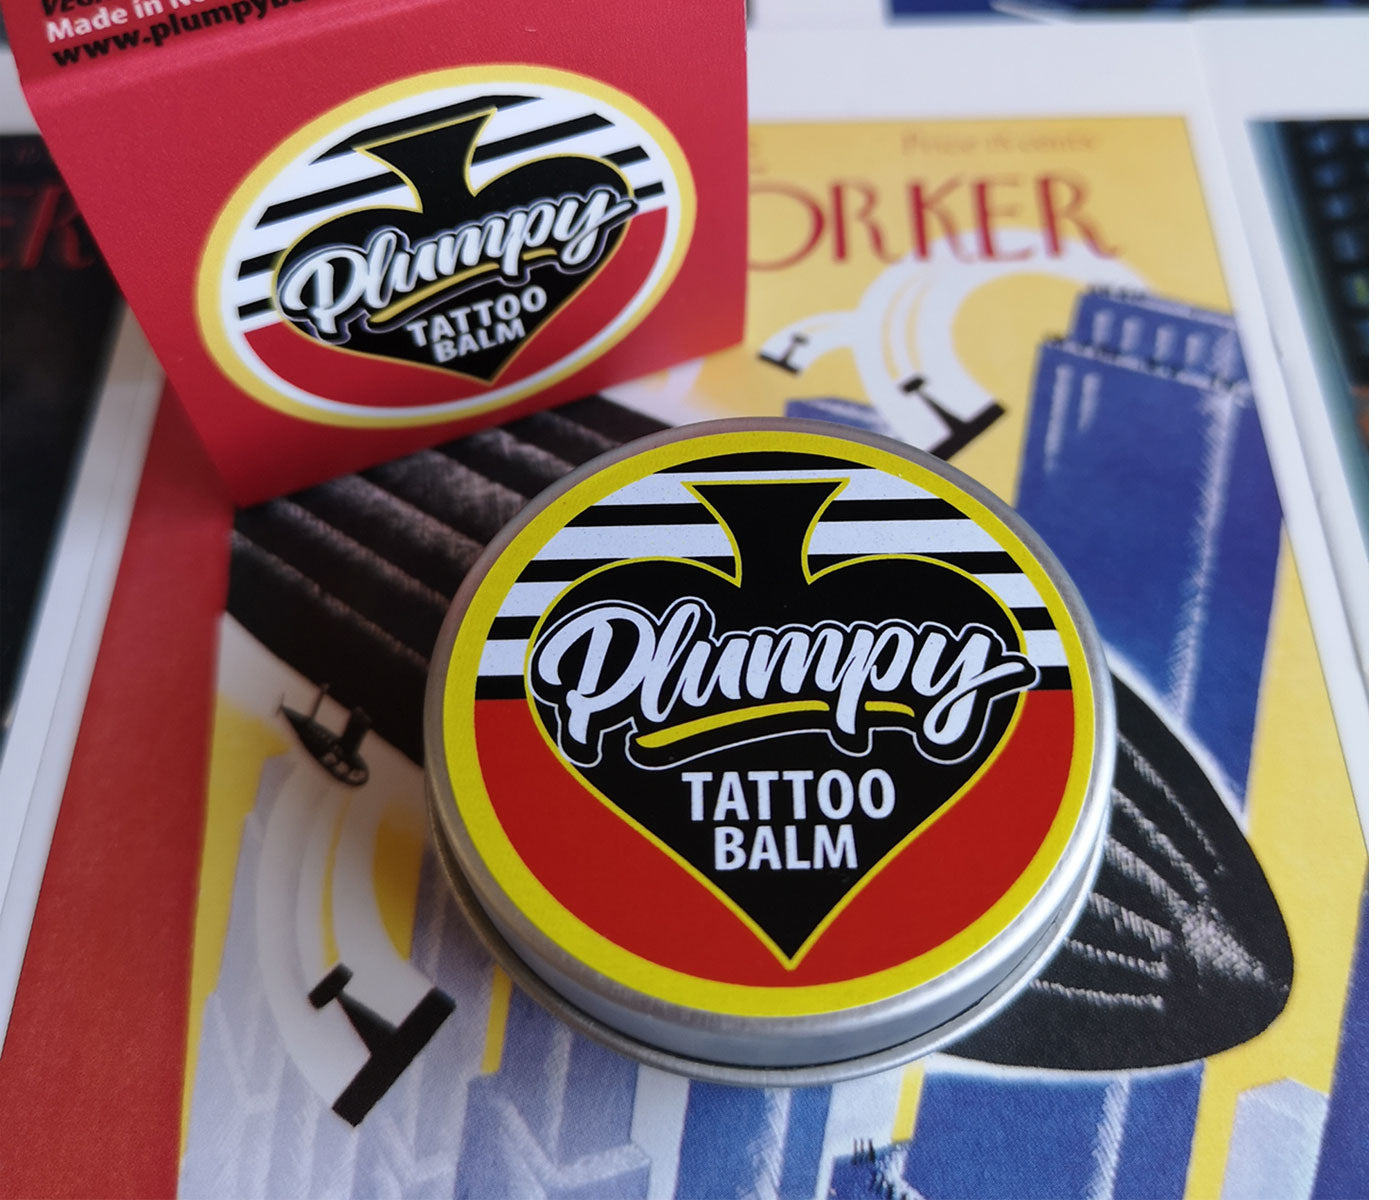 Plumpy Balms Tattoo Balm for aftercare